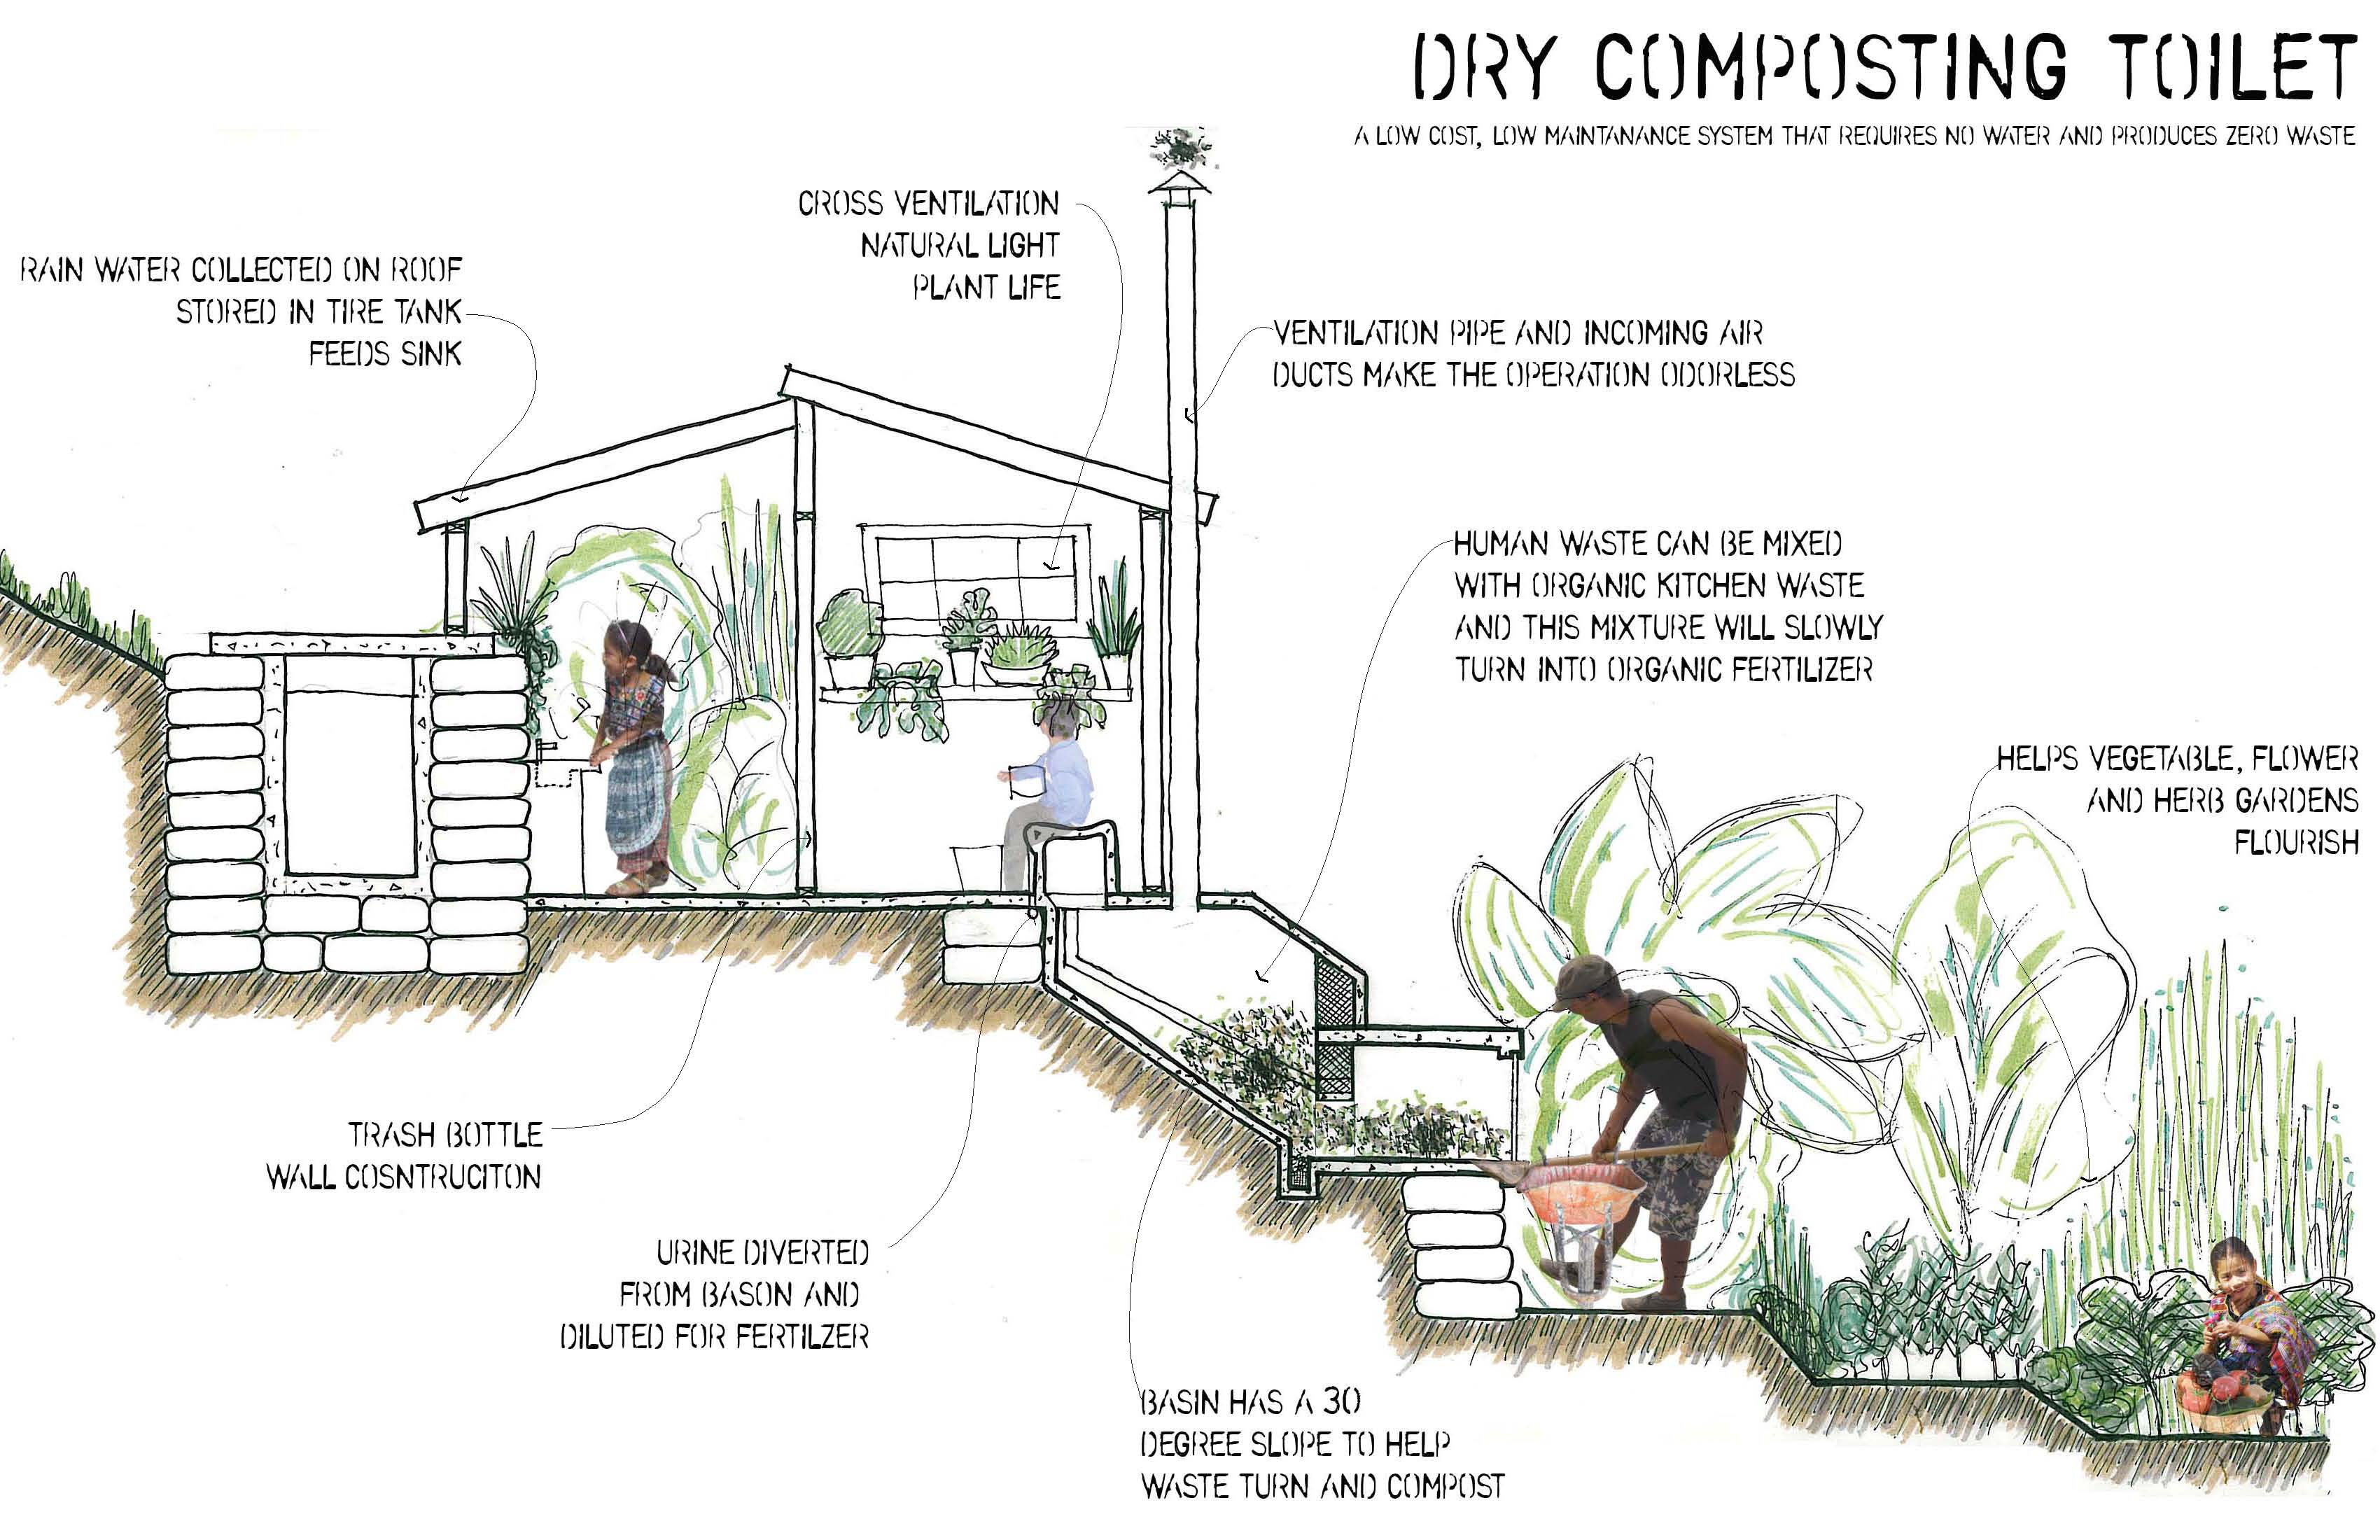 Dry Composting Toilet. The solid and liquid waste are separated, both being used to nourish adjacent gardens. The latrine will be odorless and non-polluting, while producing free organic fertilizer.